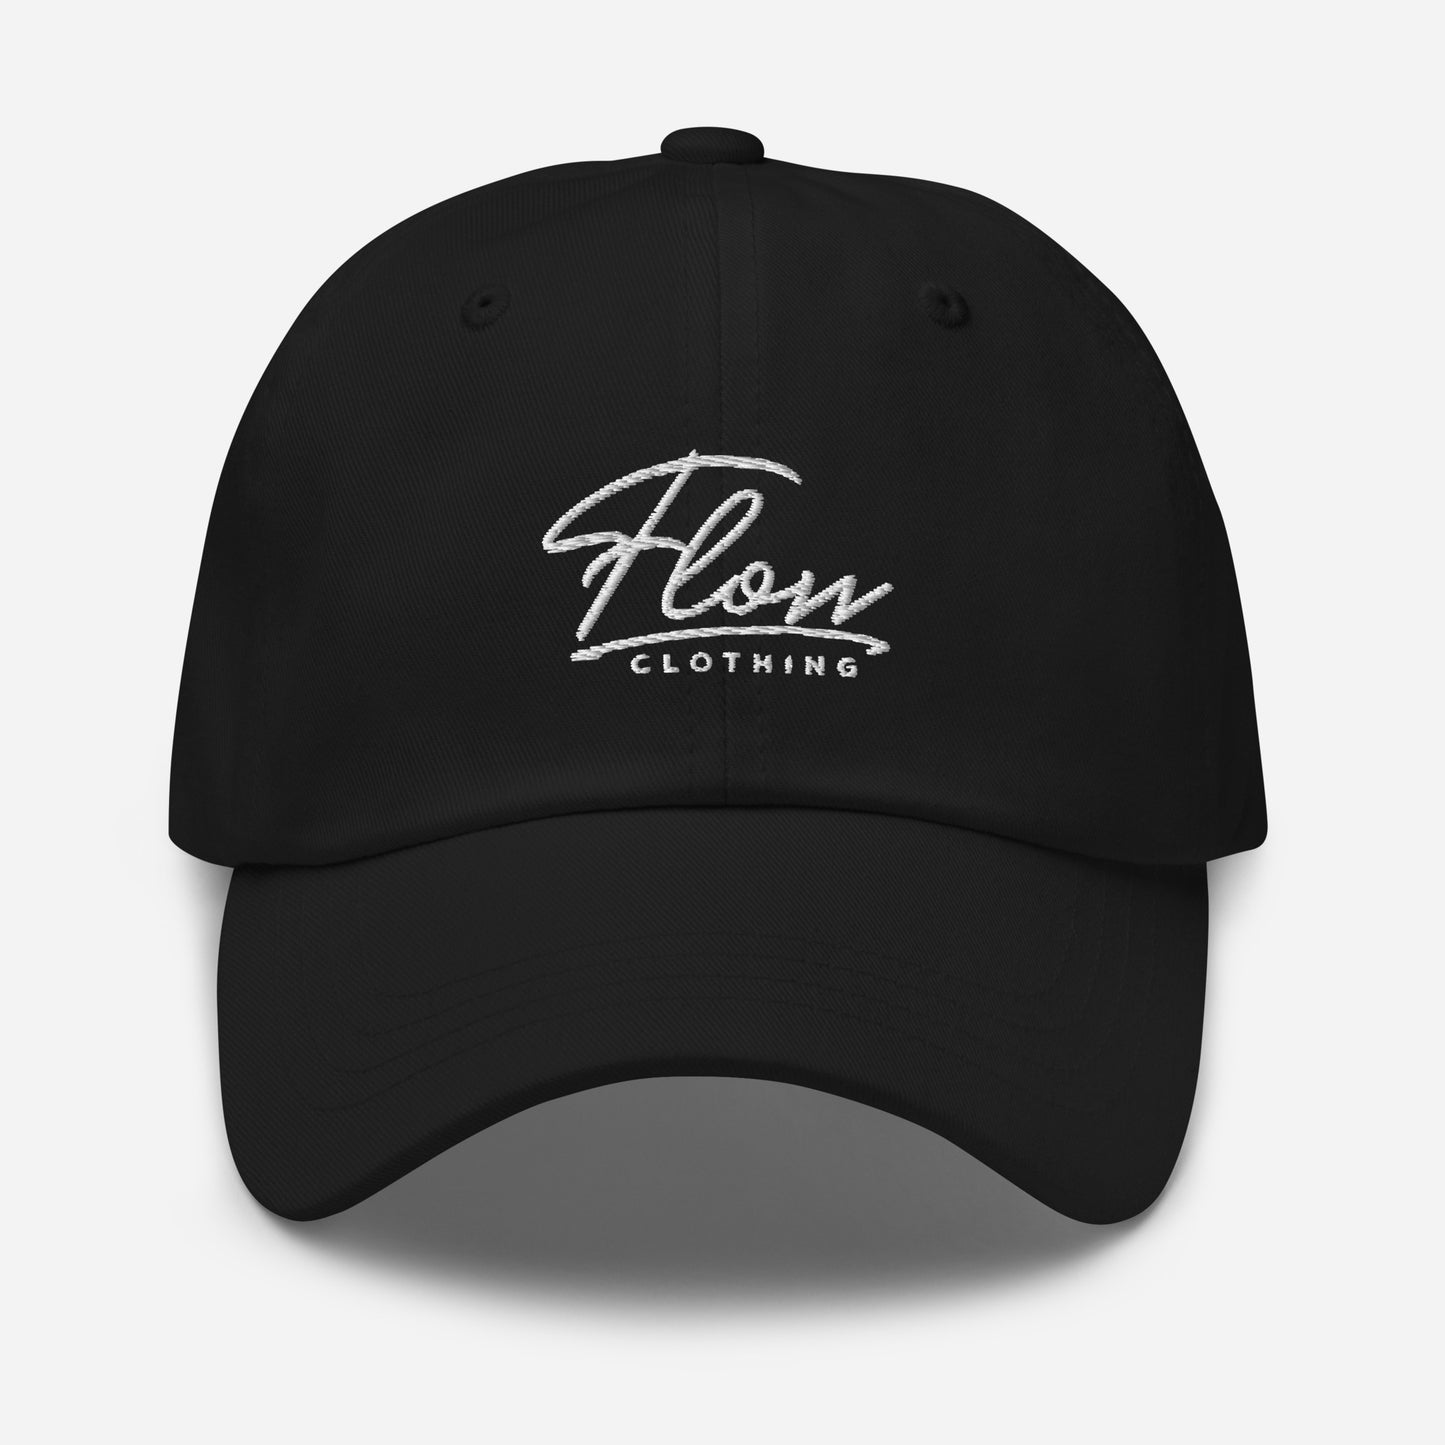 "Flow Clothing" Hat